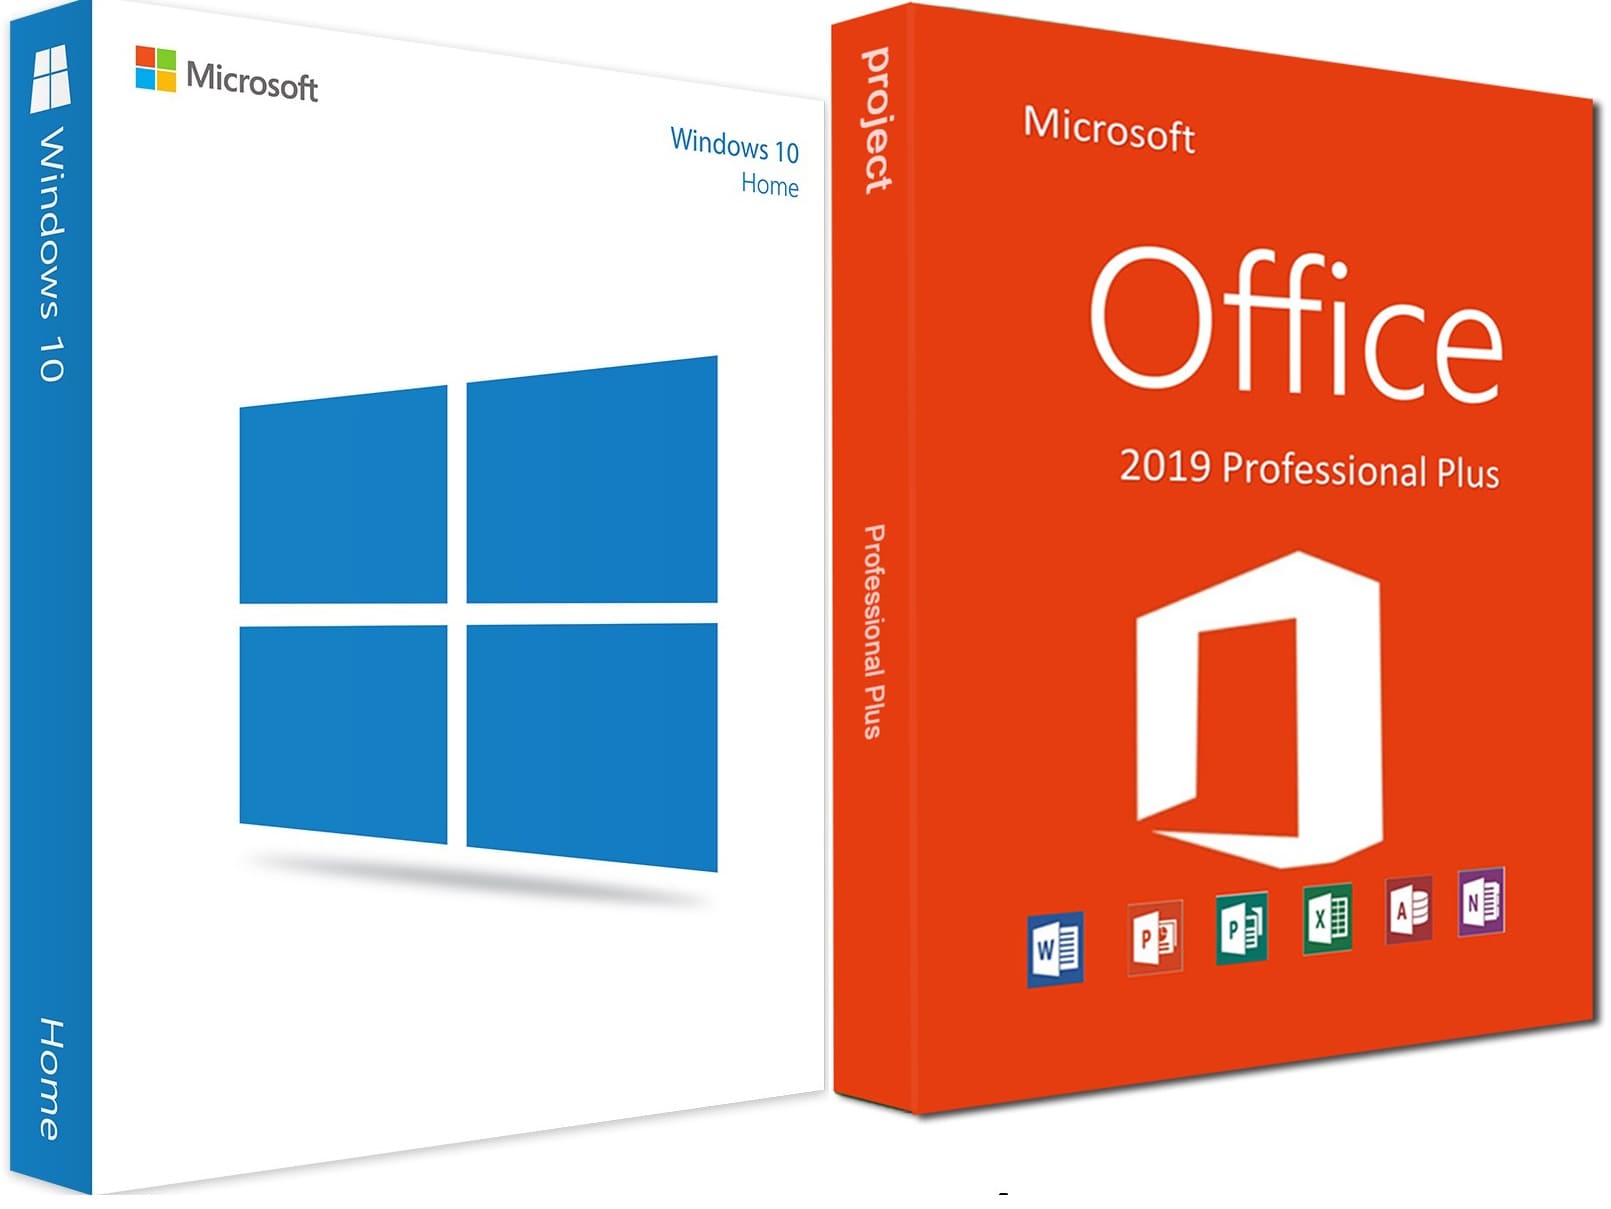 how to uninstall microsoft office 2010 on windows 10